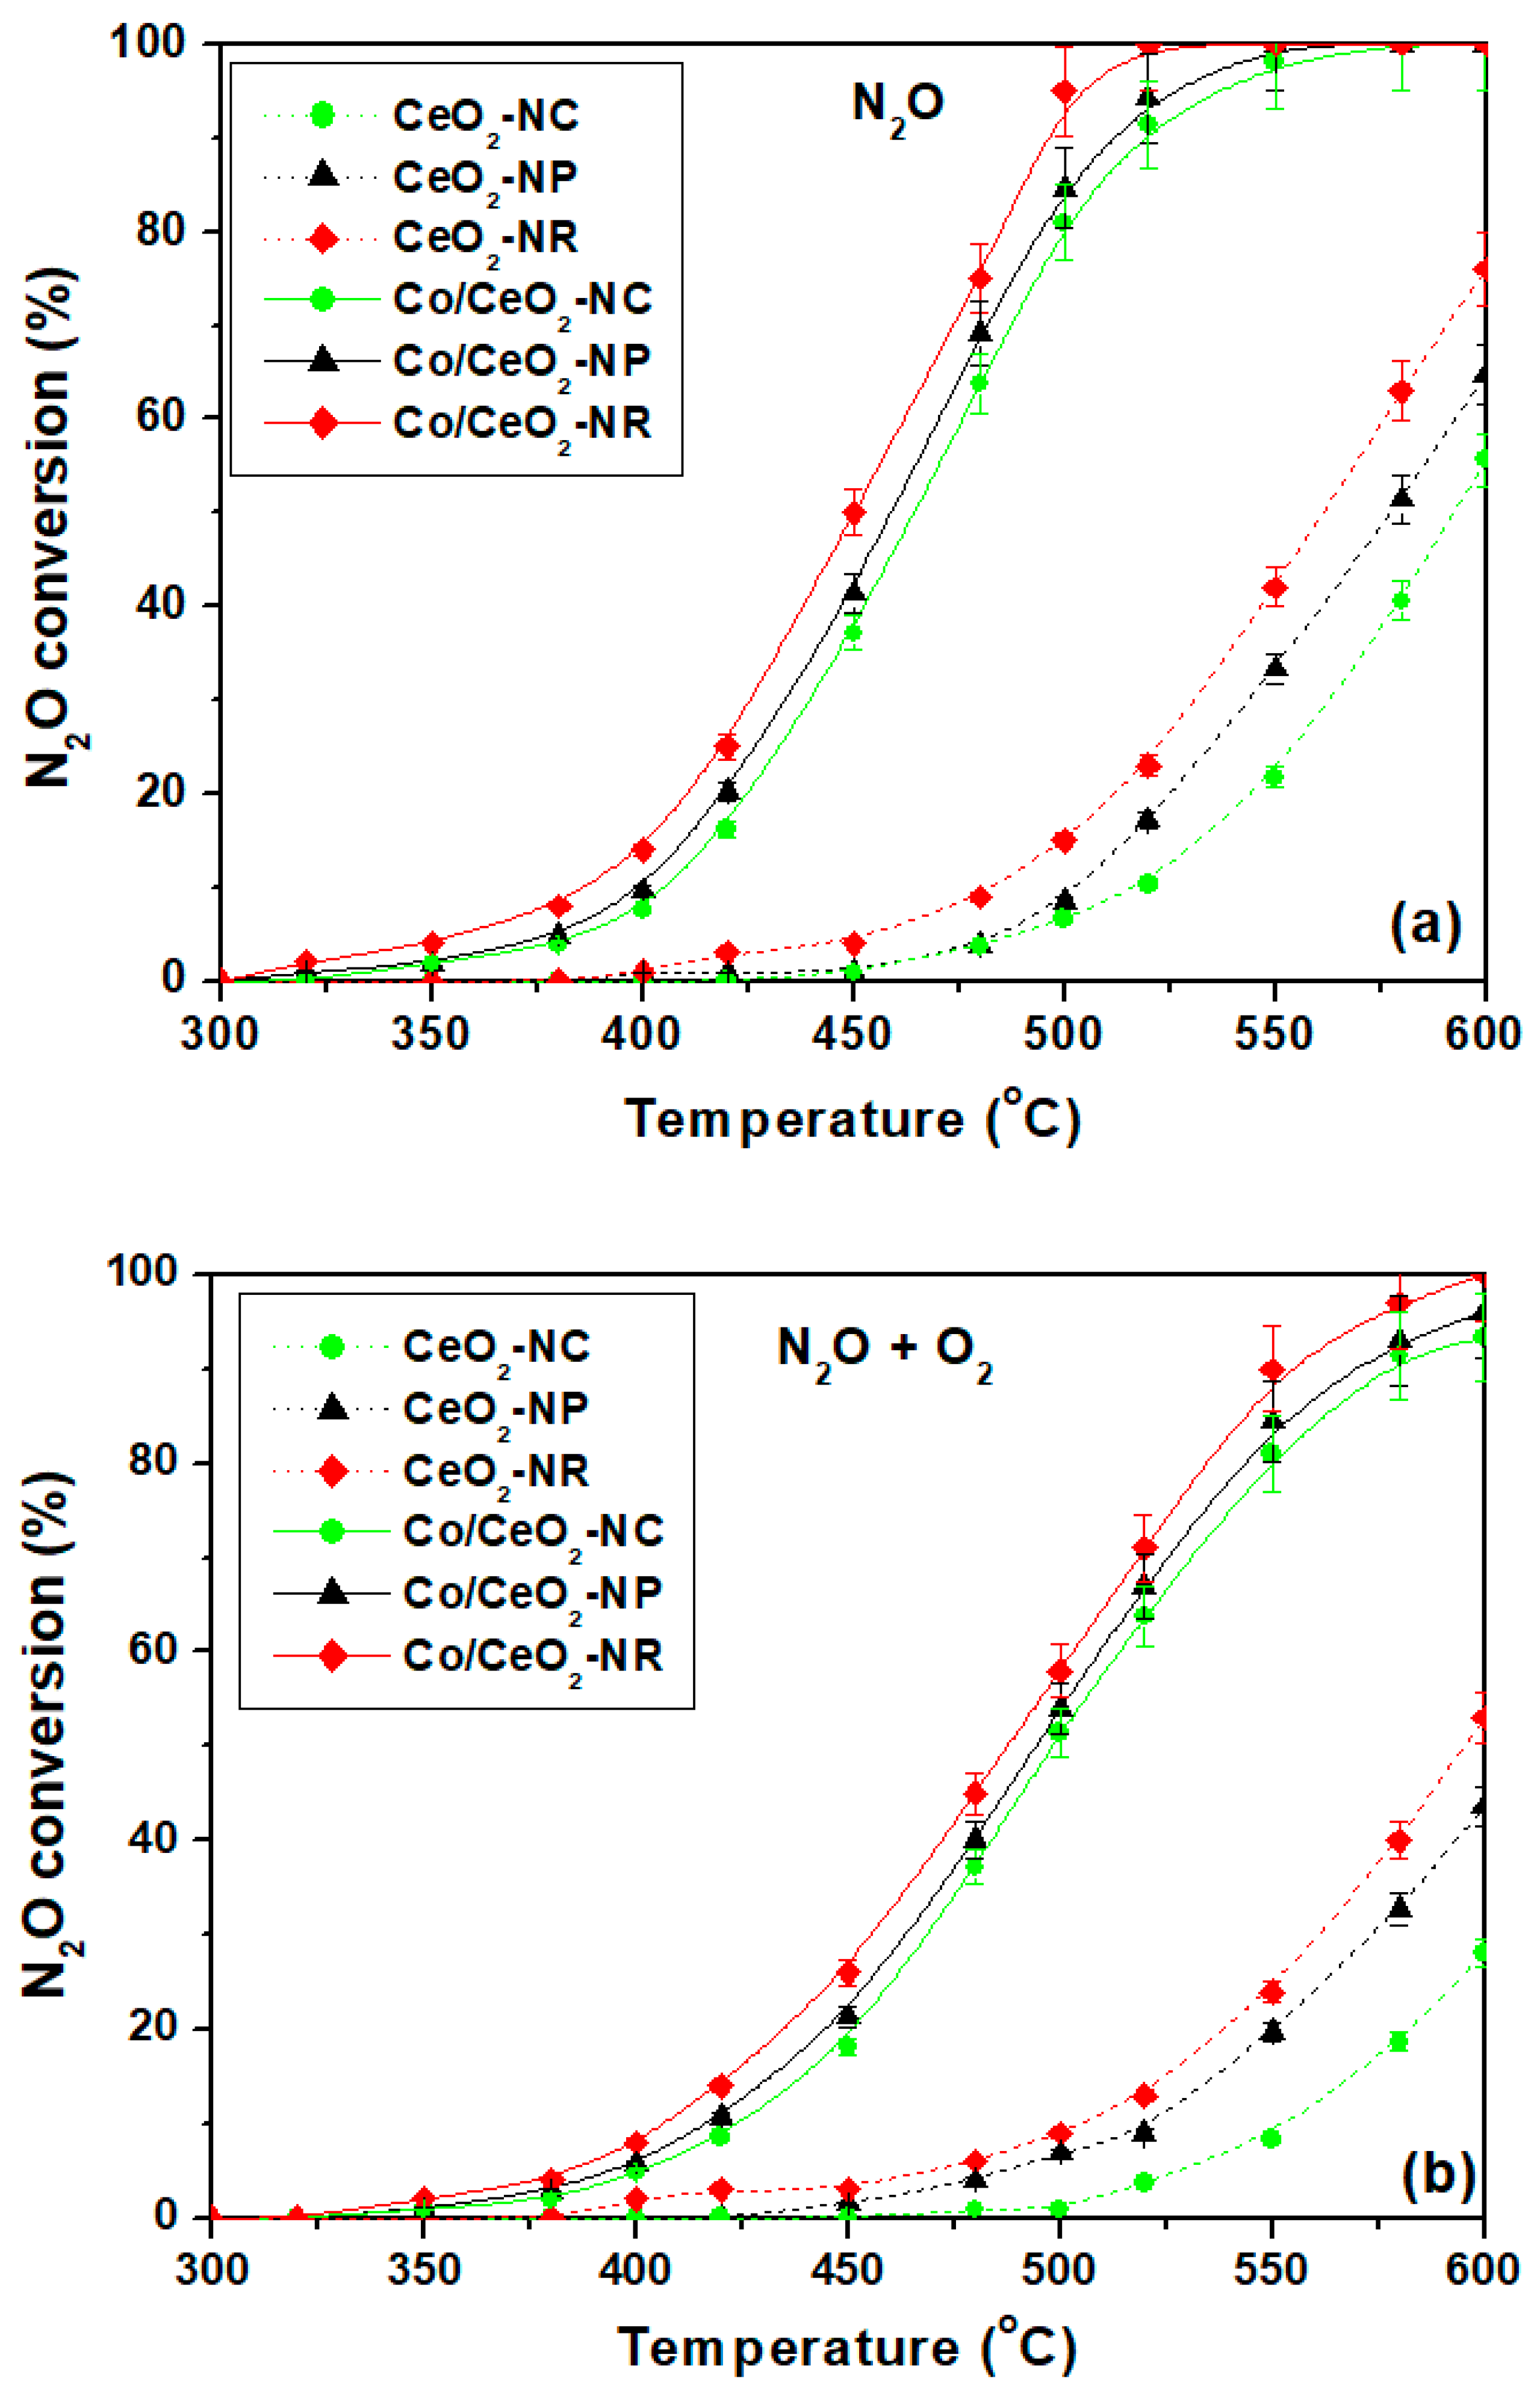 Catalysts Free Full Text Ceria Nanoparticles Morphological Effects On The N2o Decomposition Performance Of Co3o4 Ceo2 Mixed Oxides Html